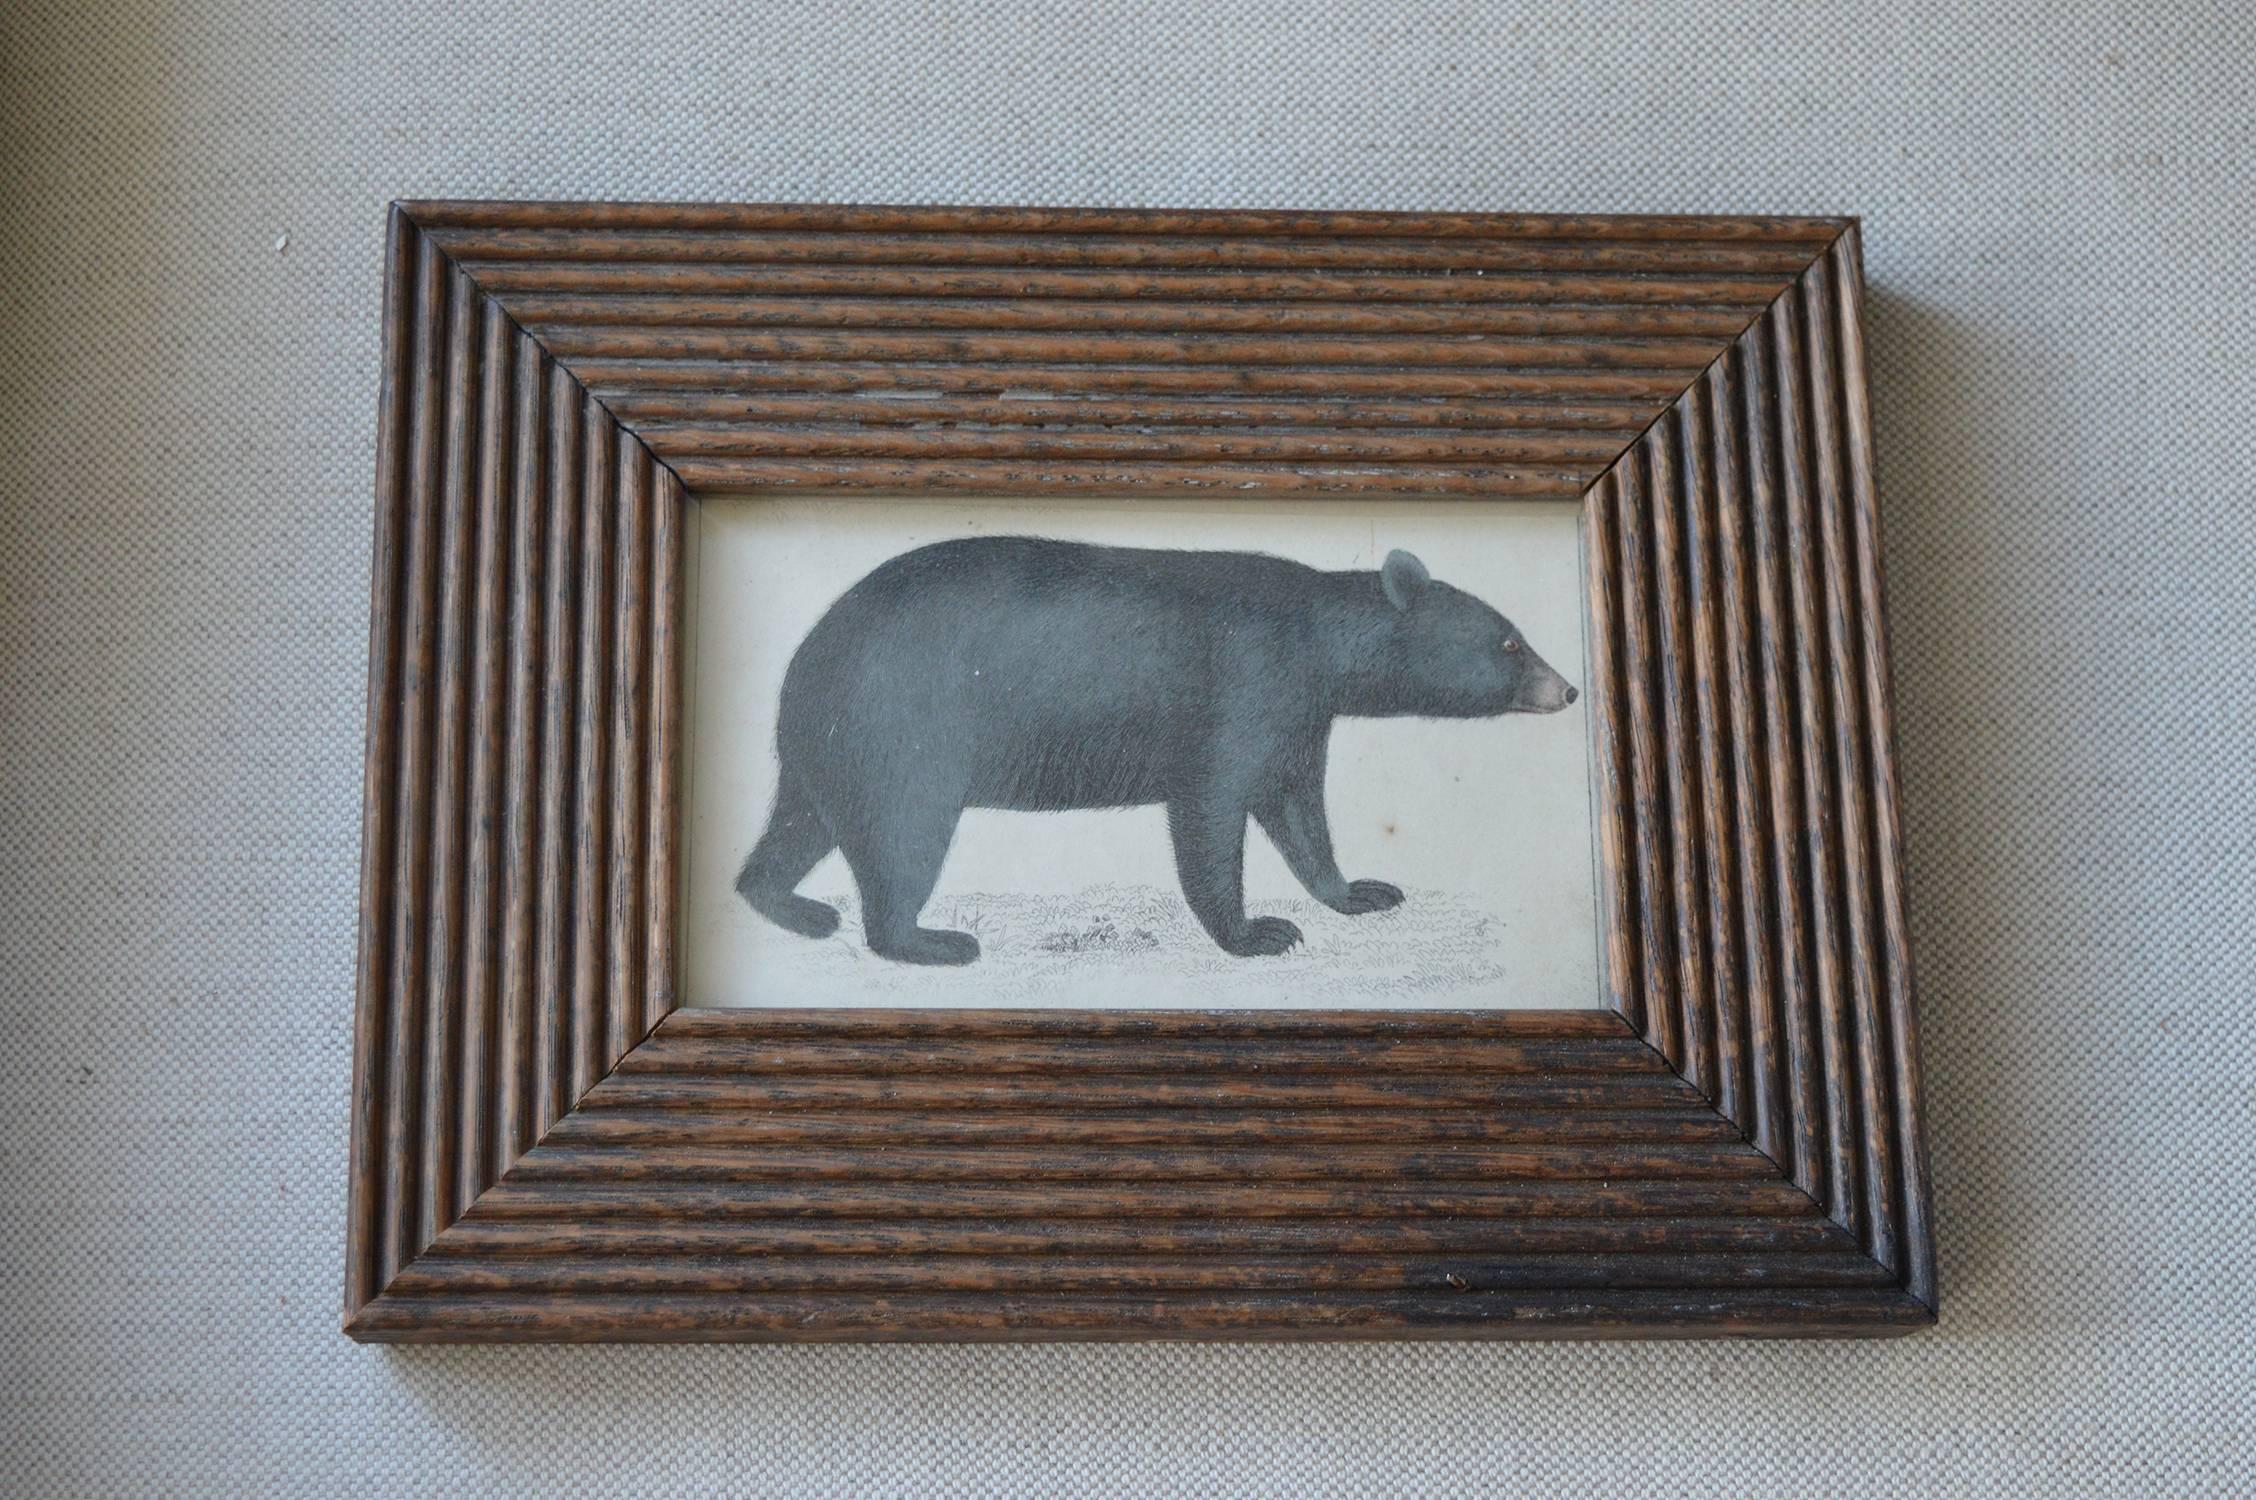 
Great image of black bear.

Hand-colored lithograph.

Original color.

Published by Fullarton, London and Edinburgh. 1847

Presented in an antique distressed oak frame.

The measurement given below is the frame size.

